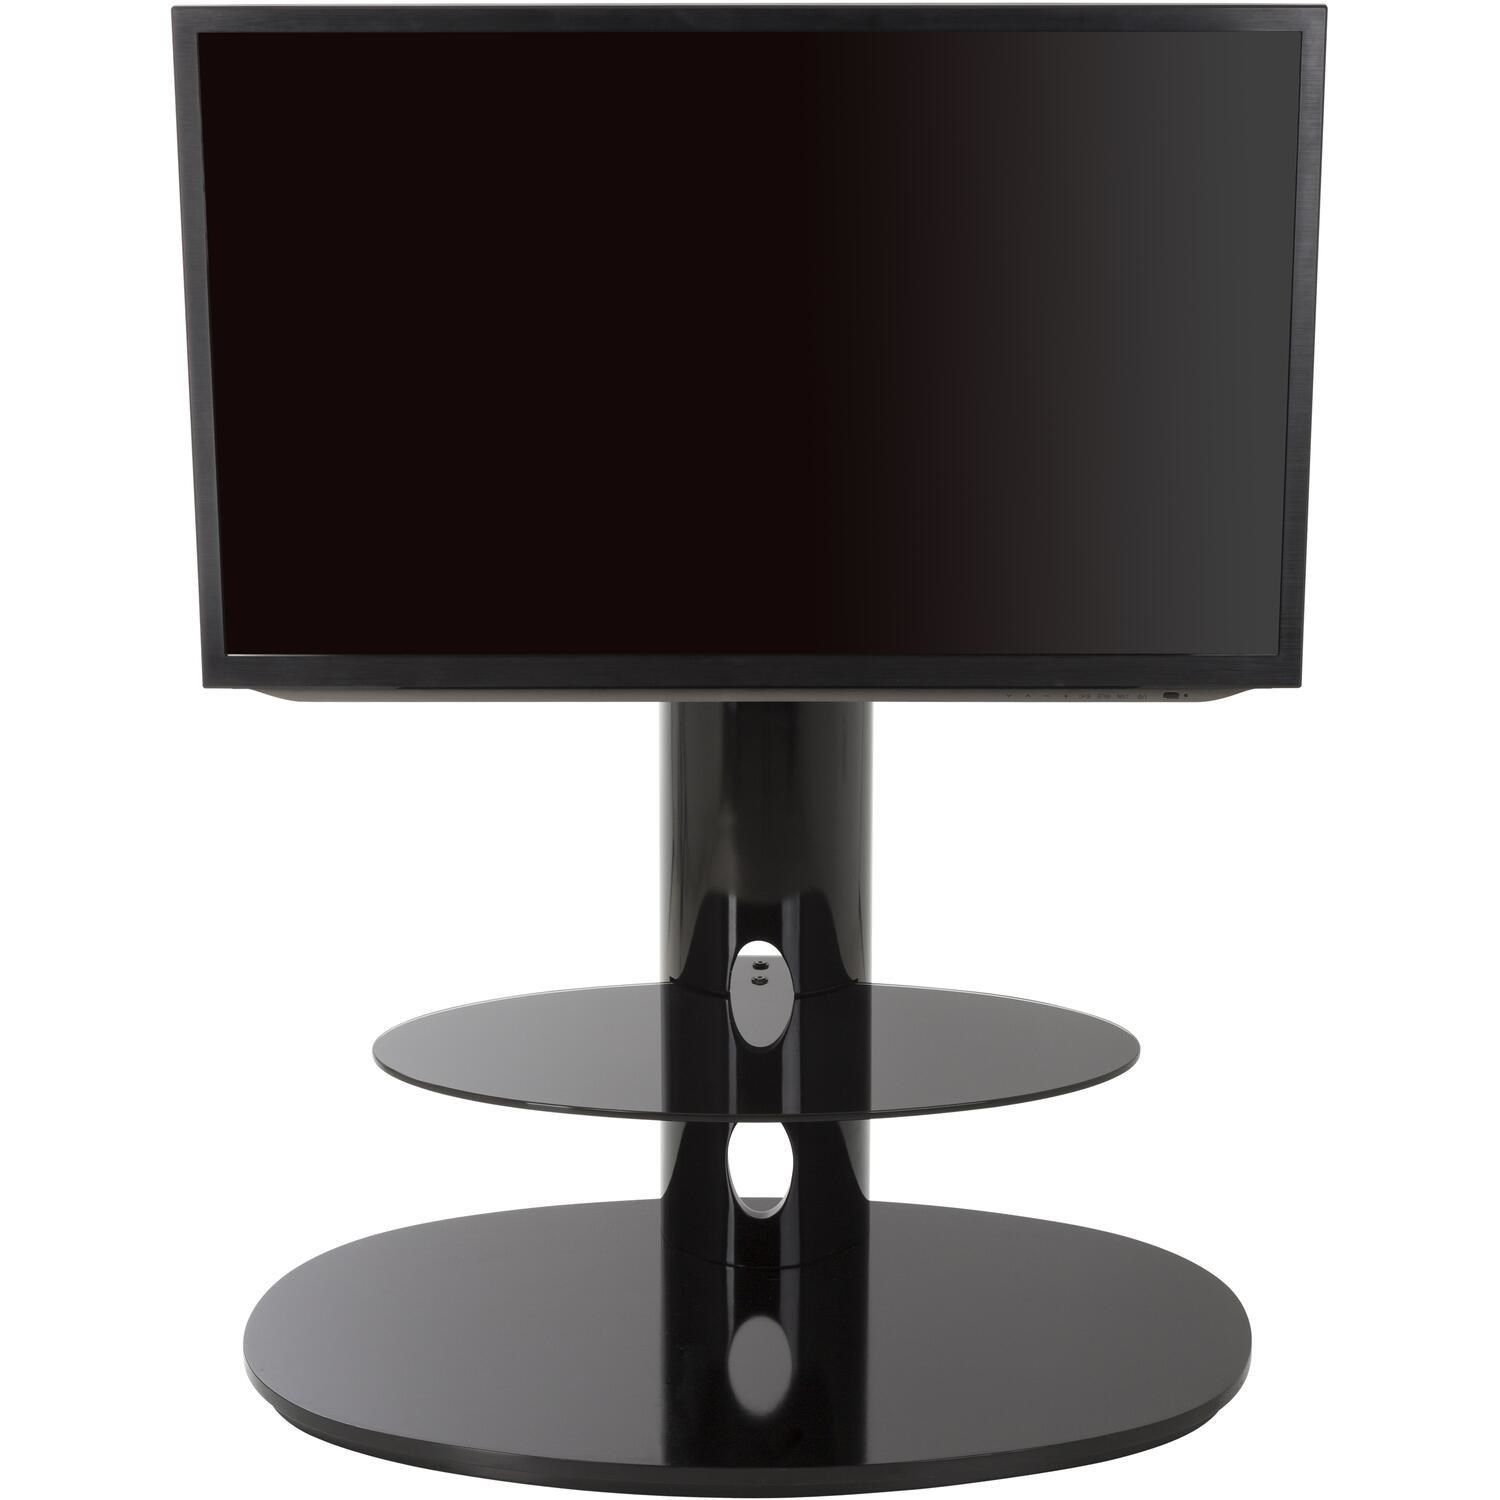 Chepstow Affinity Oval Pedestal Tv Stand 930 Black / Black Within Black Oval Tv Stand (View 1 of 15)